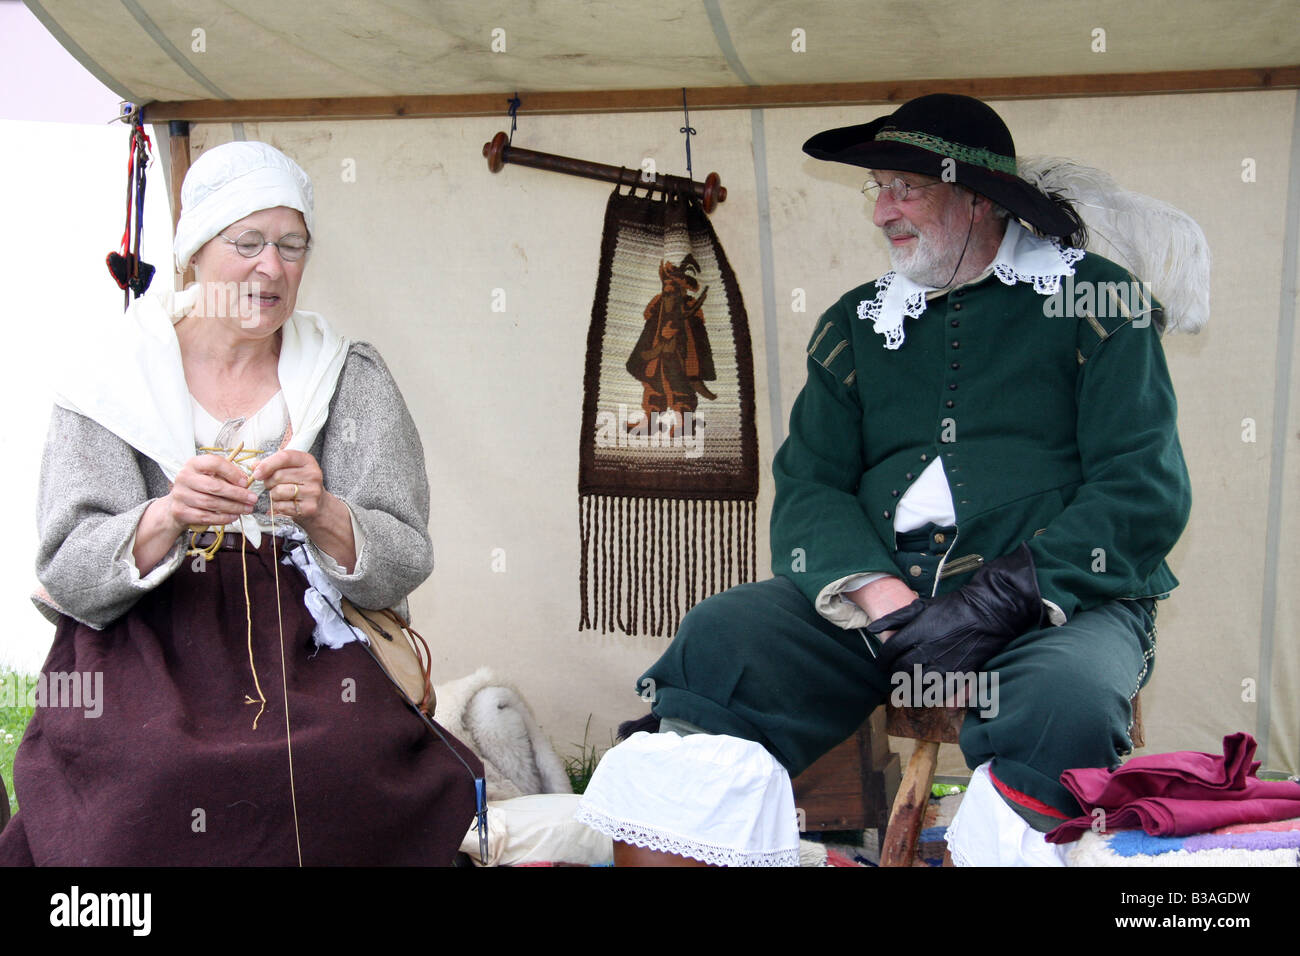 A 17th century English man and woman, at the re enactment of the battle of Faringdon in the English Civil war. Stock Photo